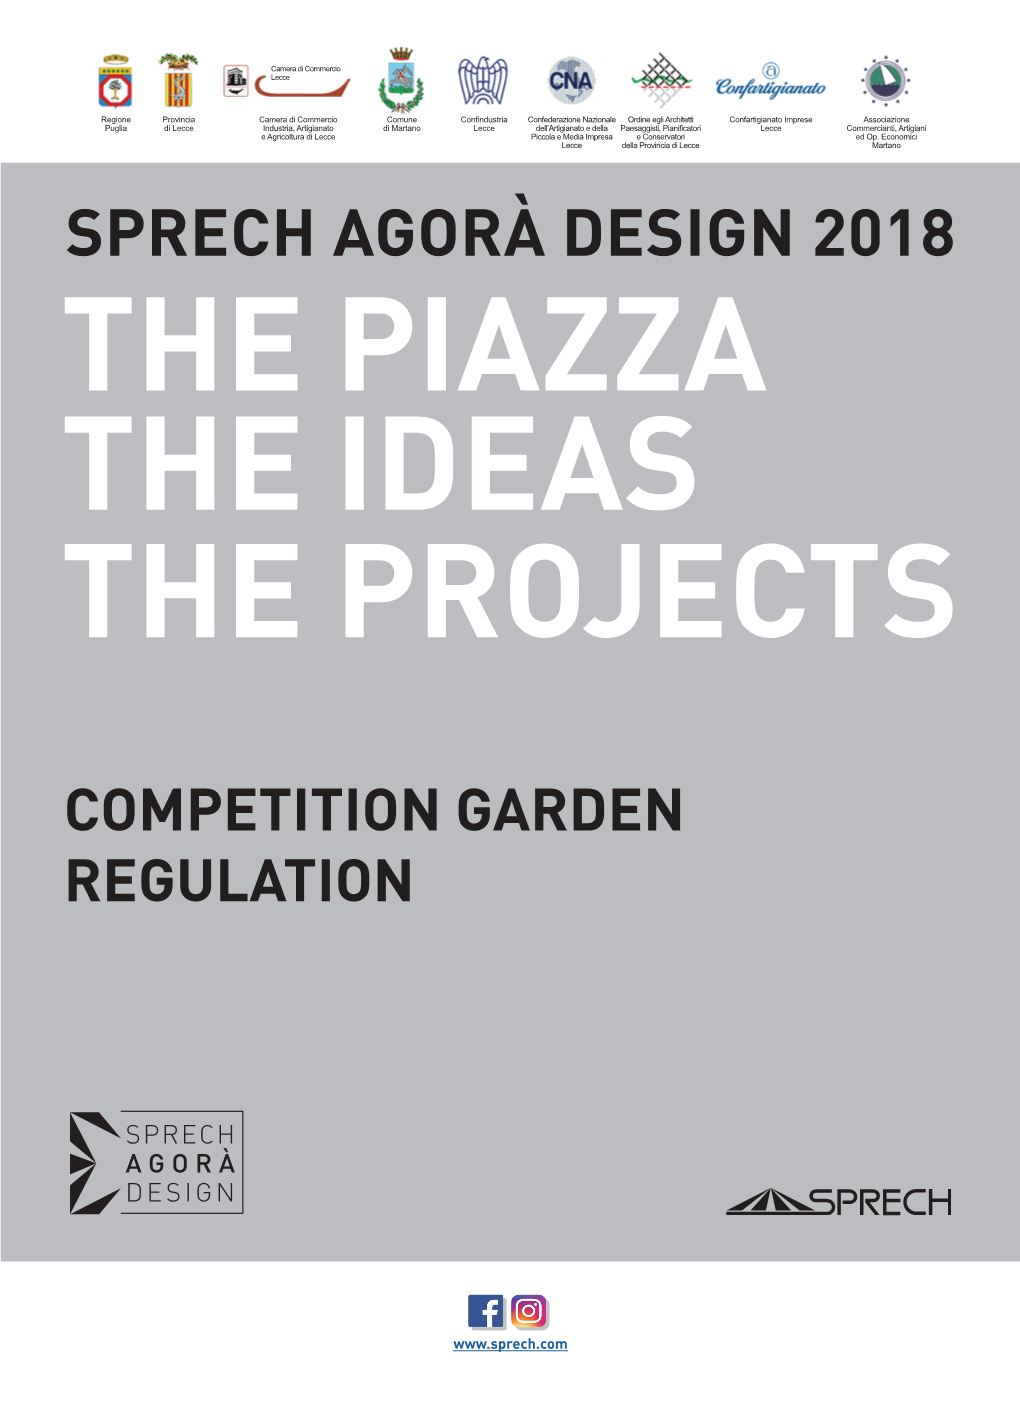 Sprech Agorà Design 2018 the Piazza the Ideas the Projects